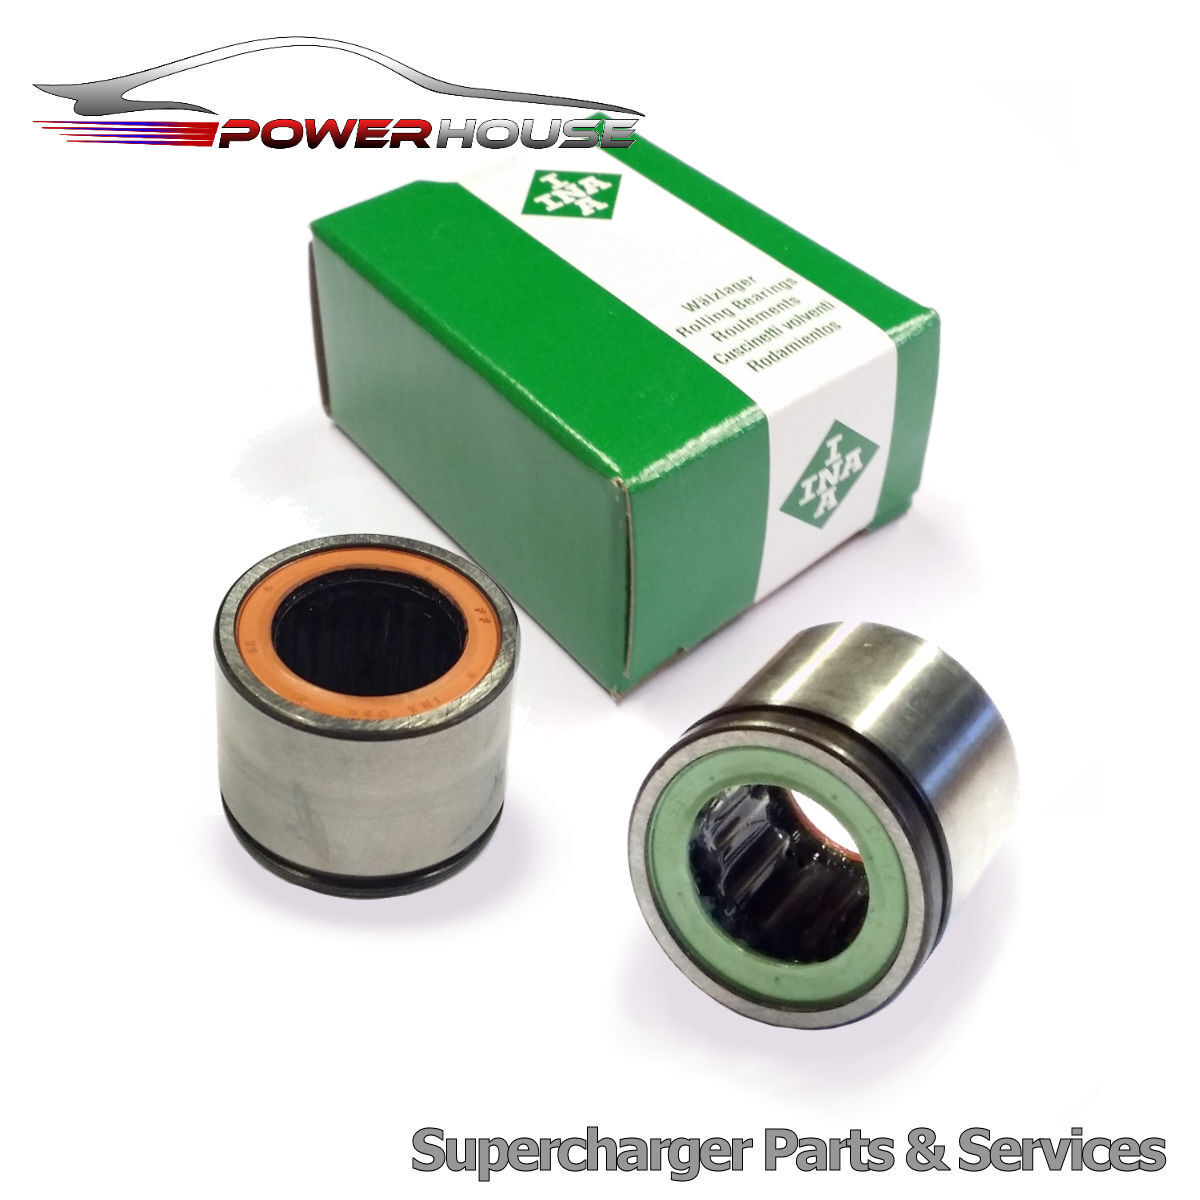 Holden Clubsport R8 Supercharger Case Bearings Rebuild Kit 2015 2016 2017 6.2